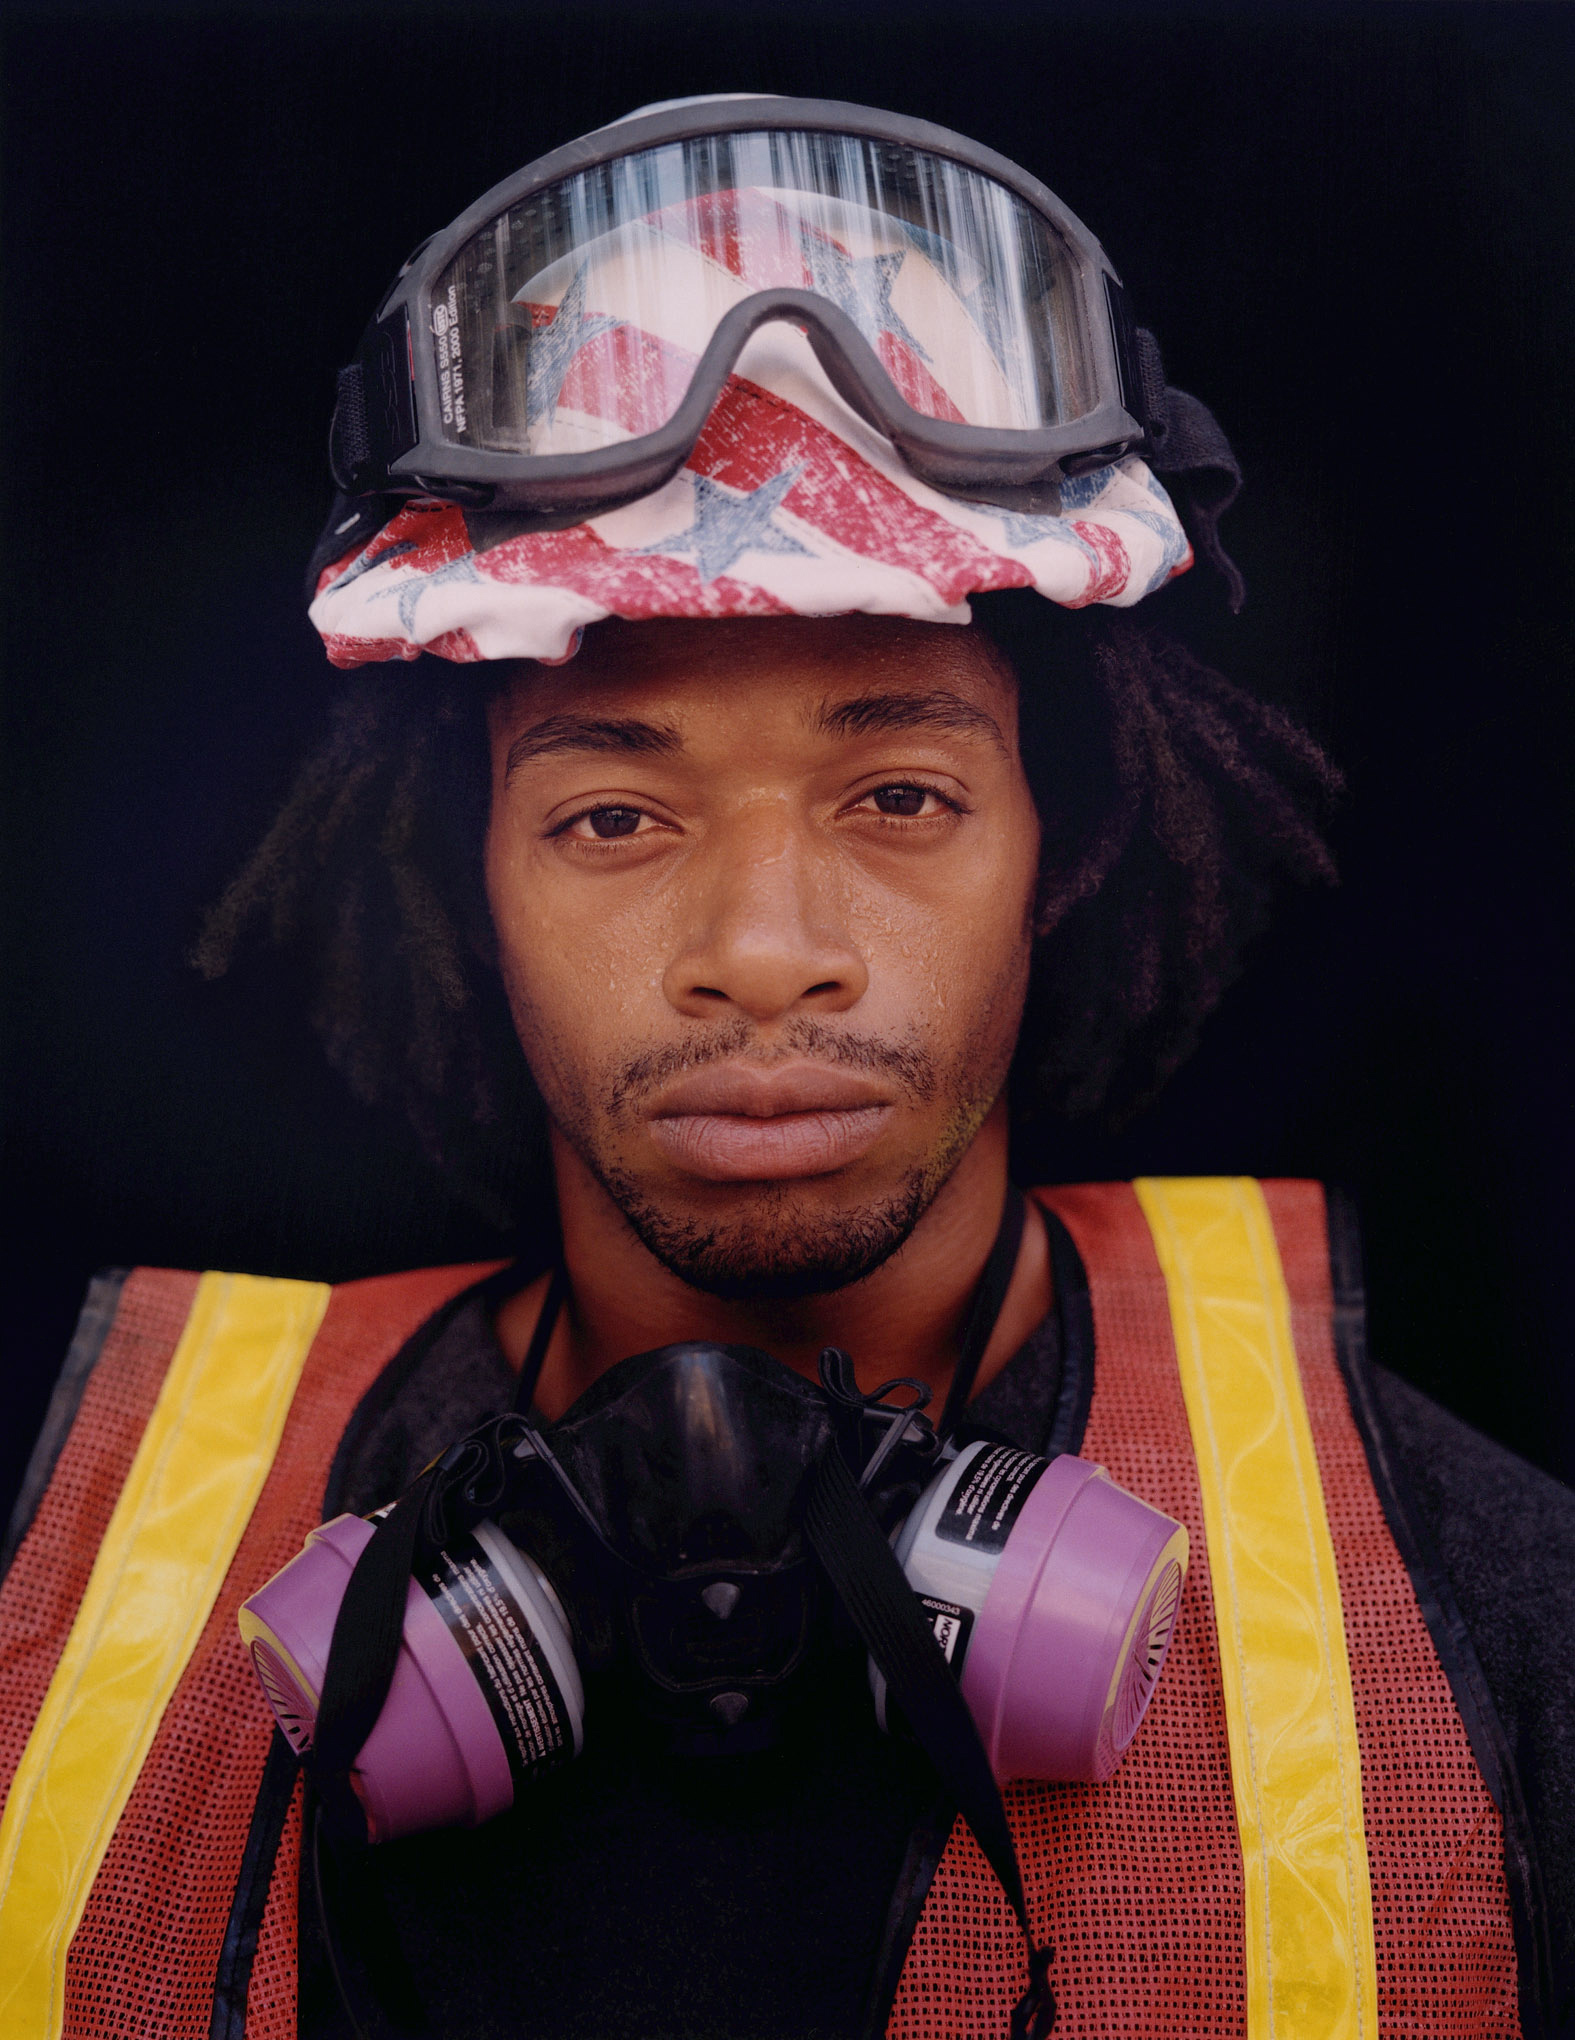 A man with goggles, safety vest, hard hat, adorned with stars and stripes, stares straight ahead in this photographic portrait.   